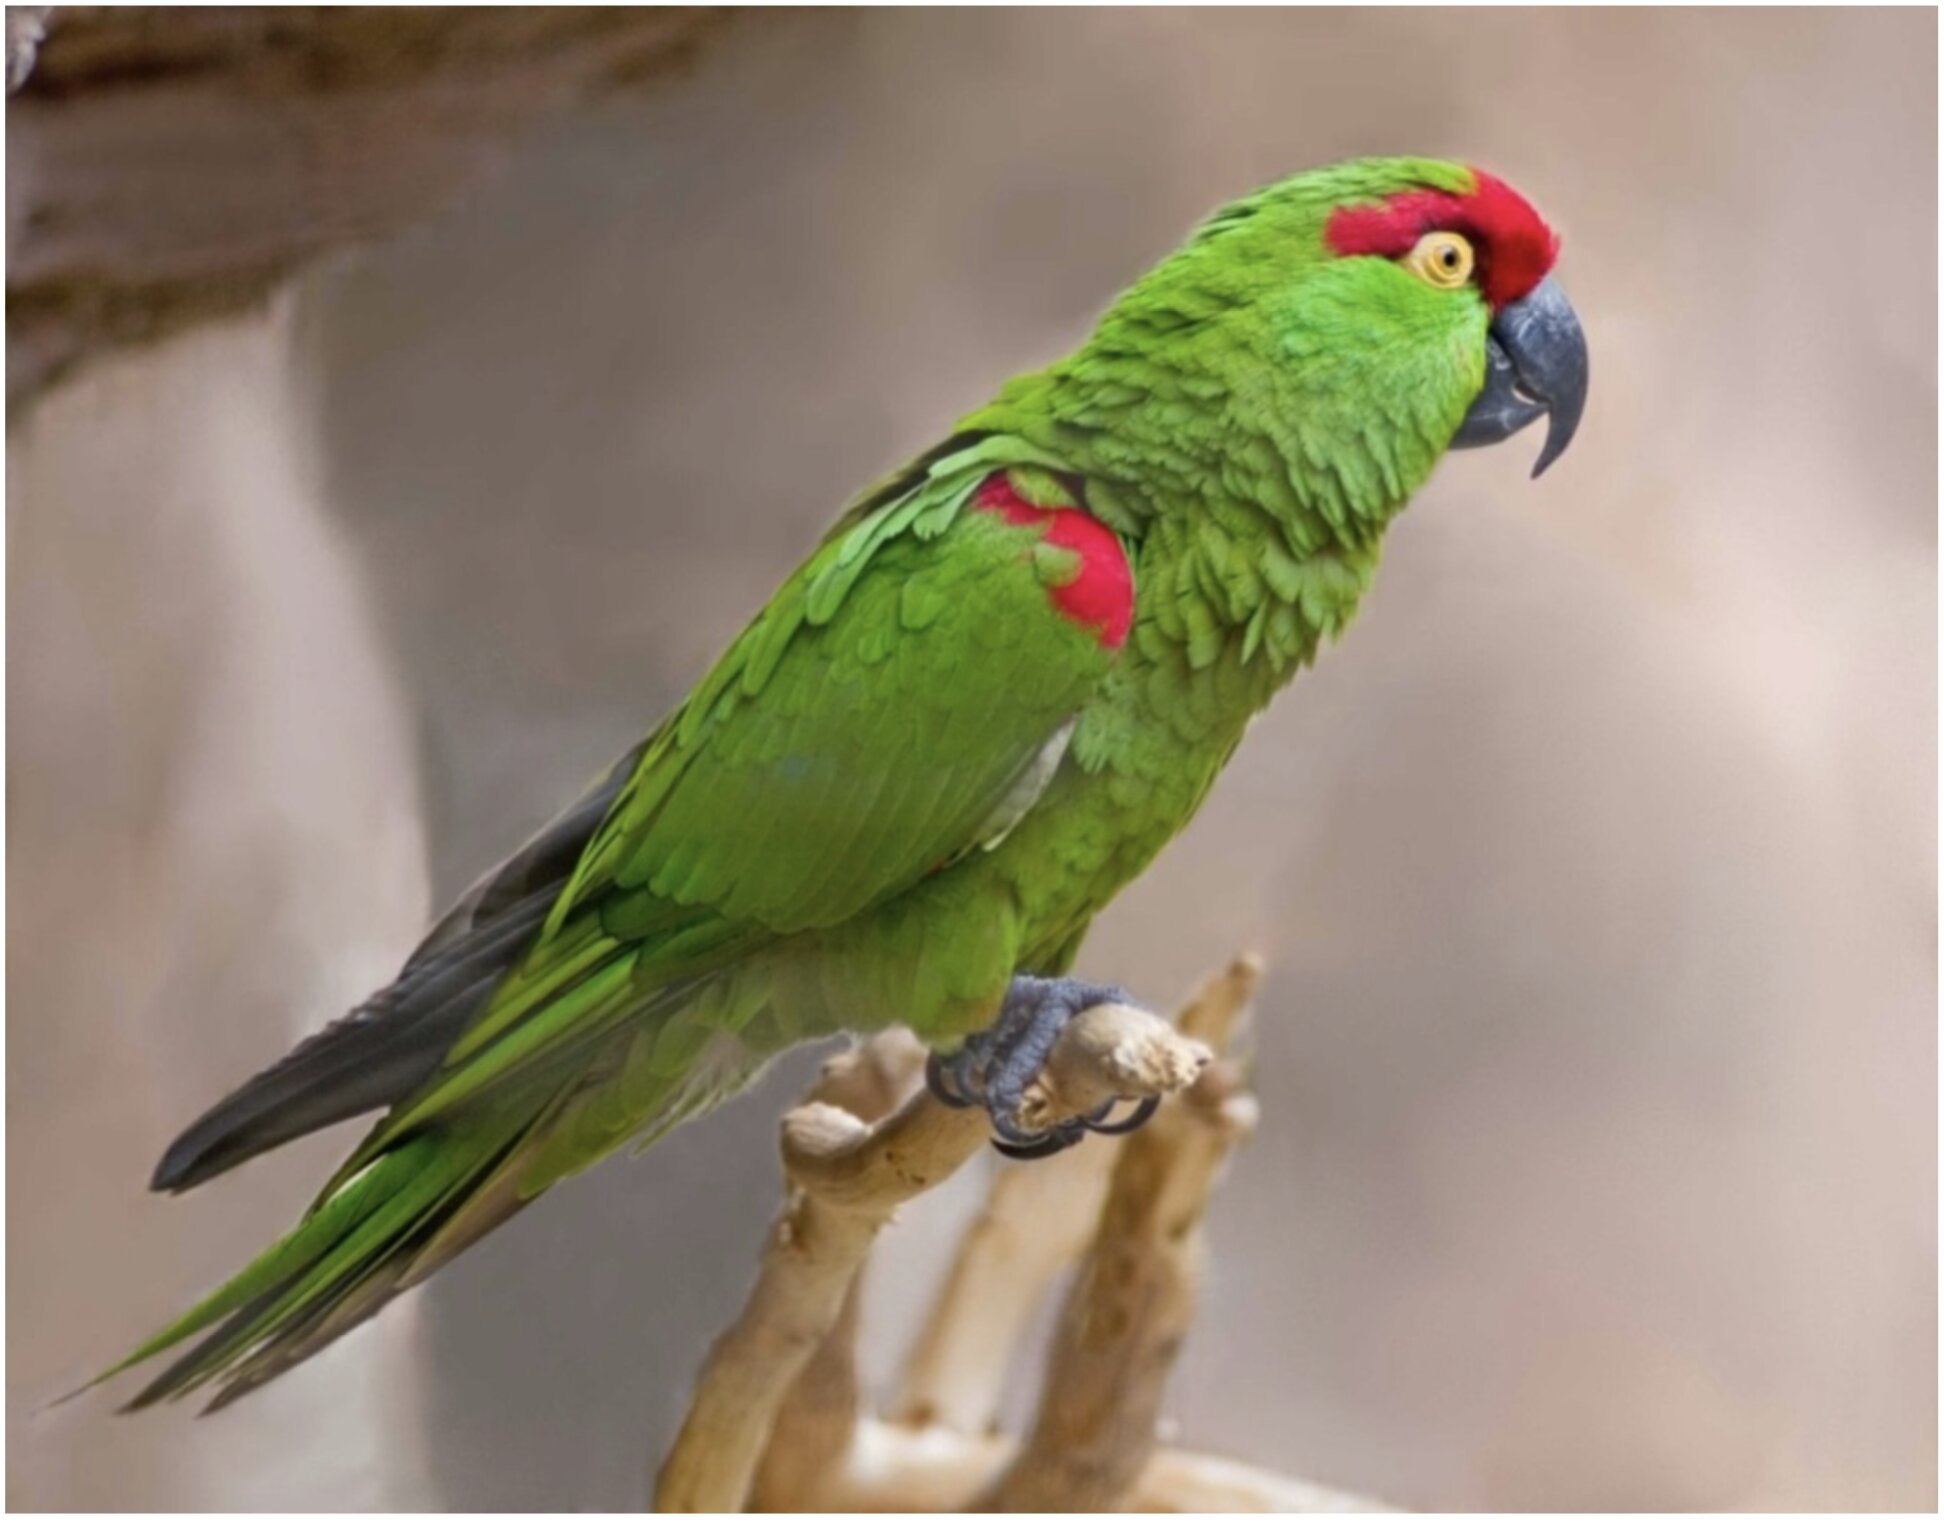 Old bone links lost American parrot to ancient Indigenous bird trade